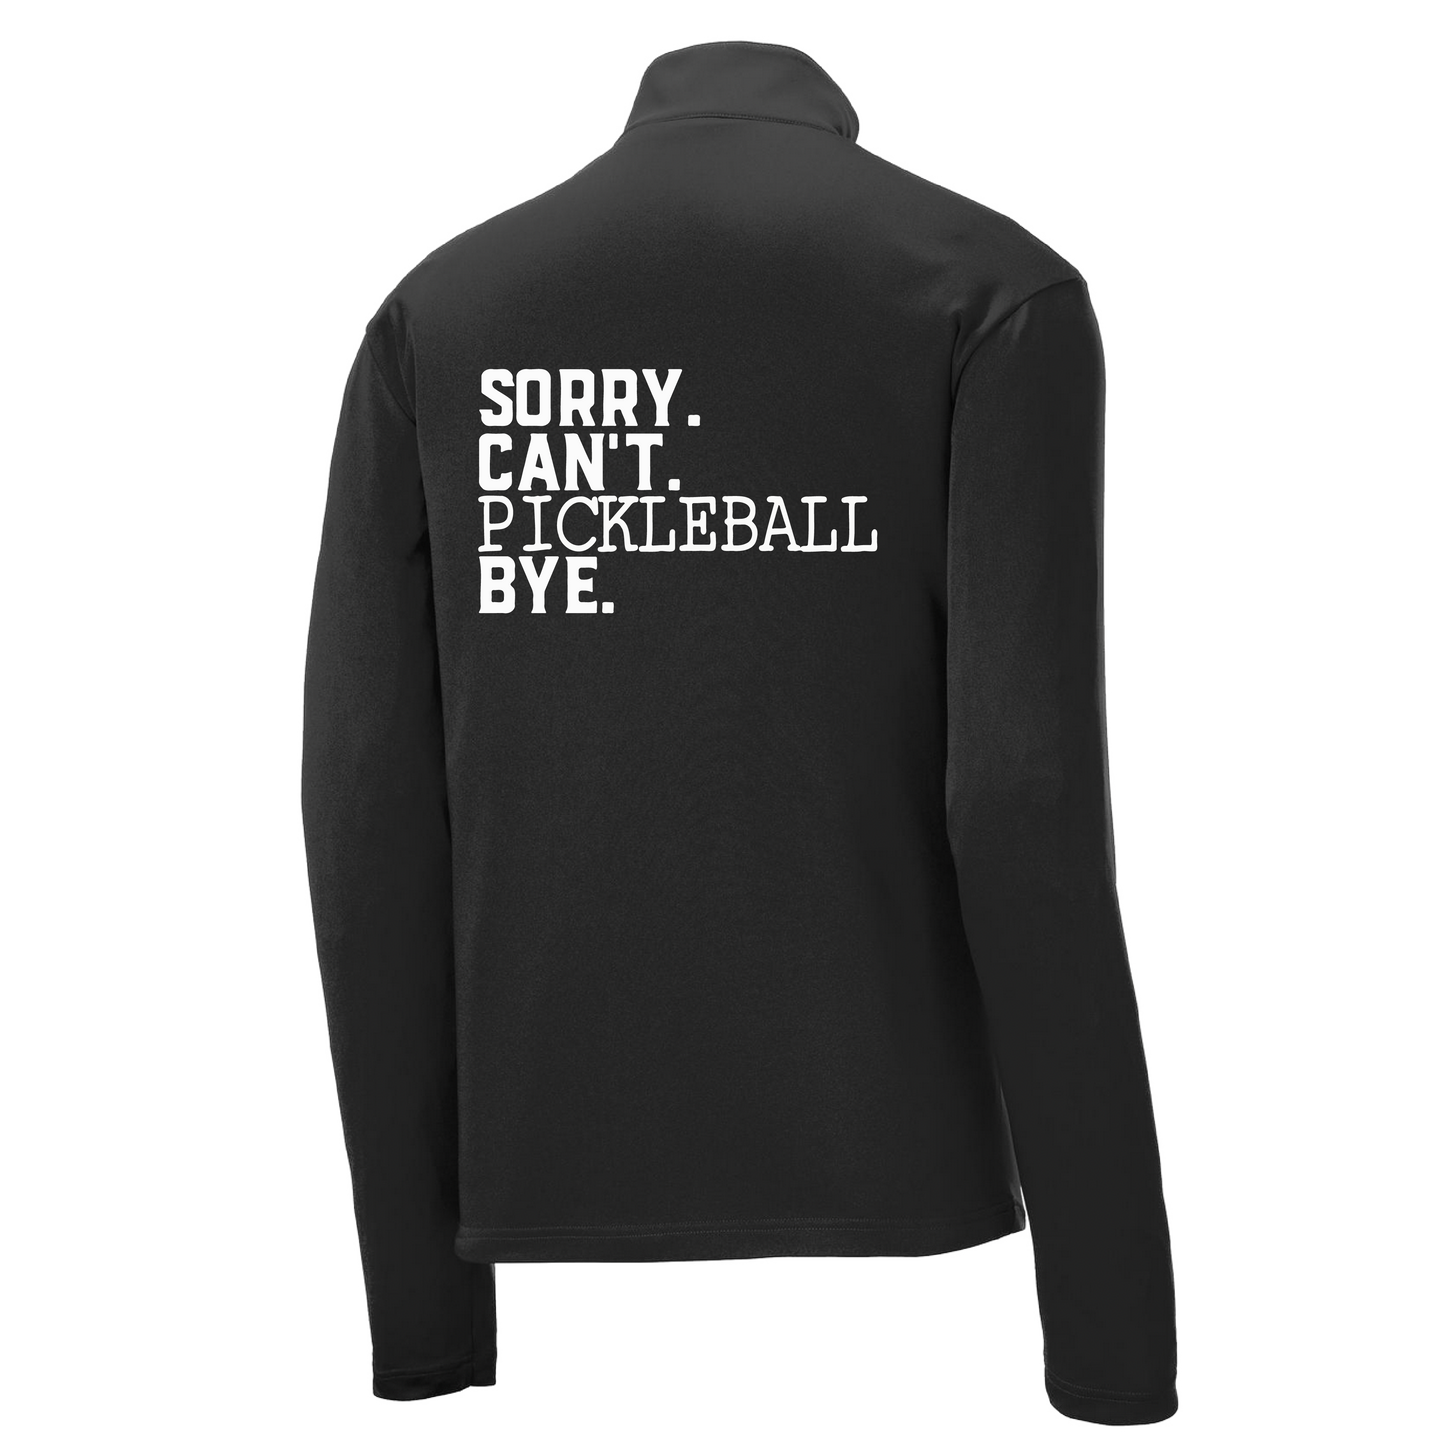 Sorry Can't Pickleball Bye | Men's 1/4 Zip Long Sleeve Pullover Athletic Shirt | 100% Polyester